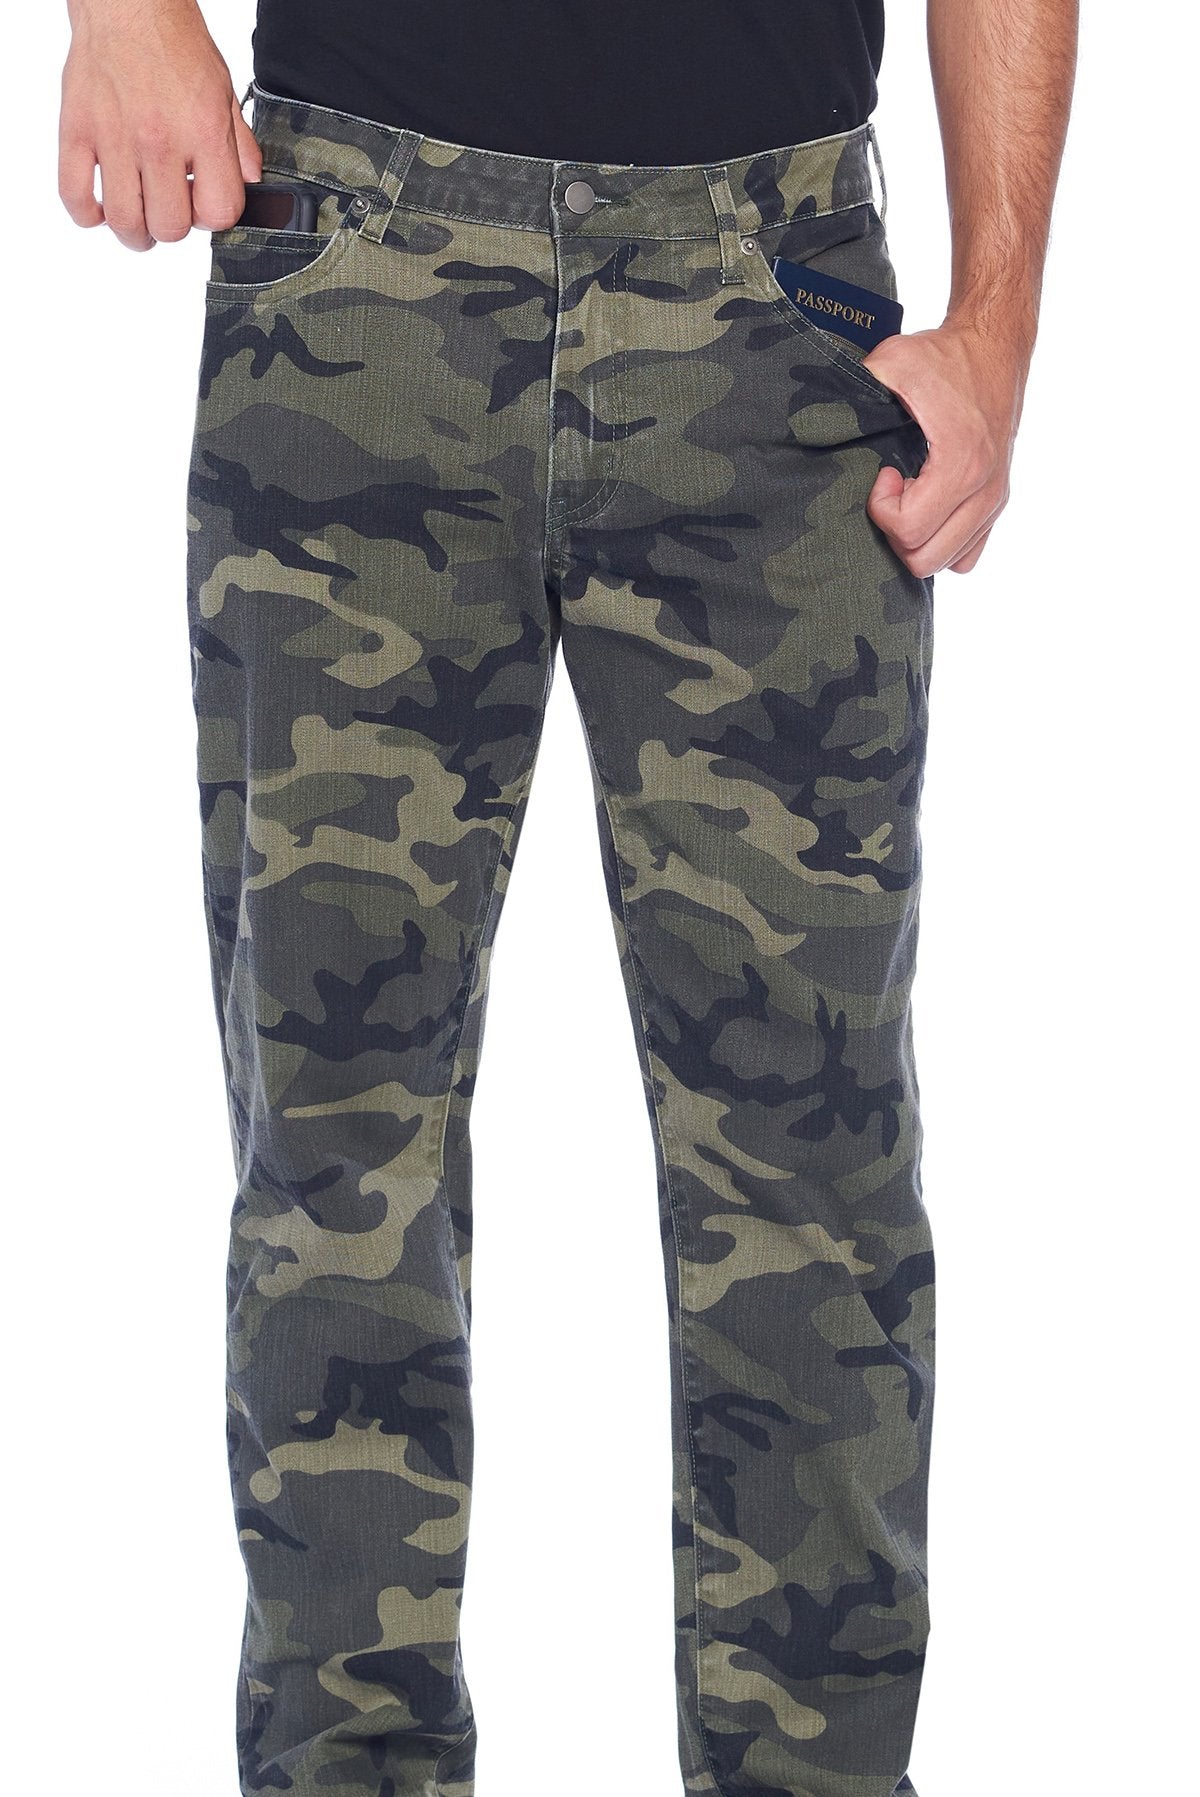 The Best Travel Jeans in the World for Men | Camo Made in the USA - Aviator